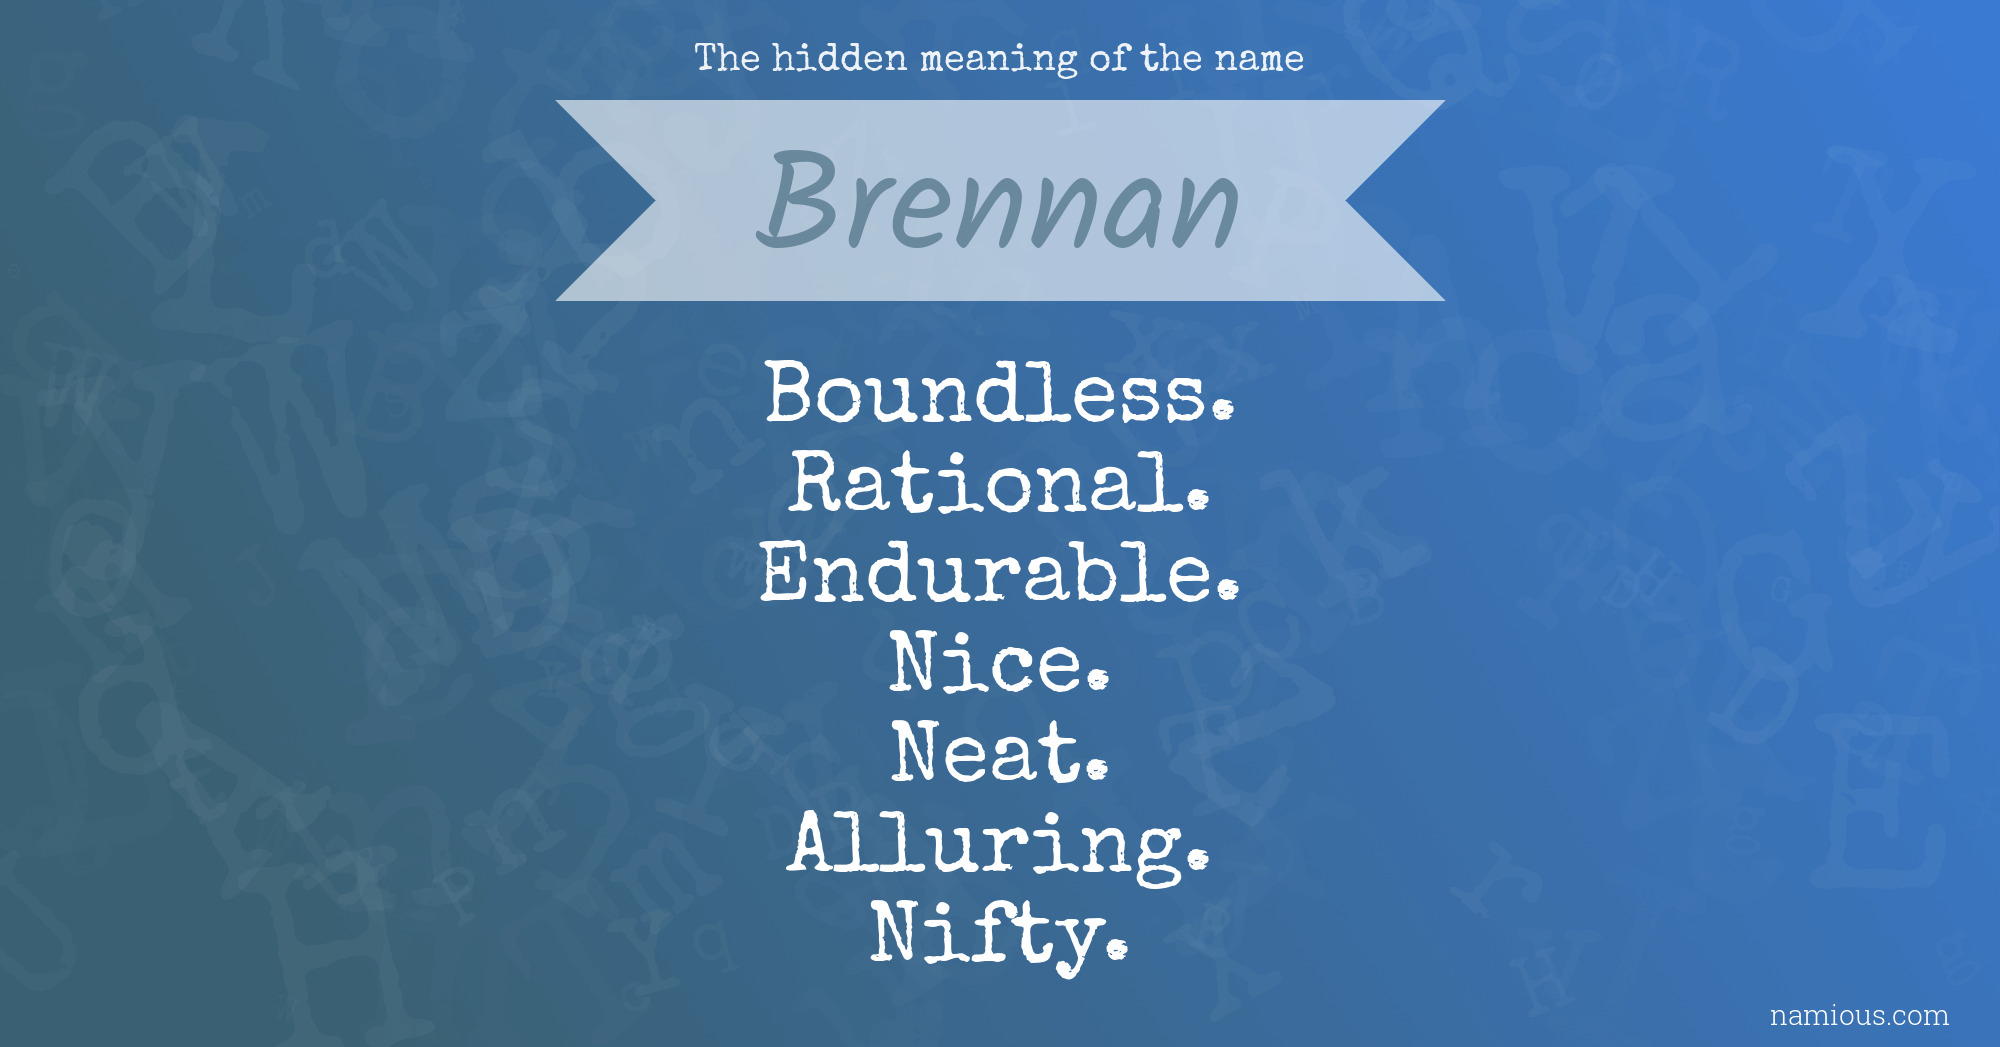 The hidden meaning of the name Brennan